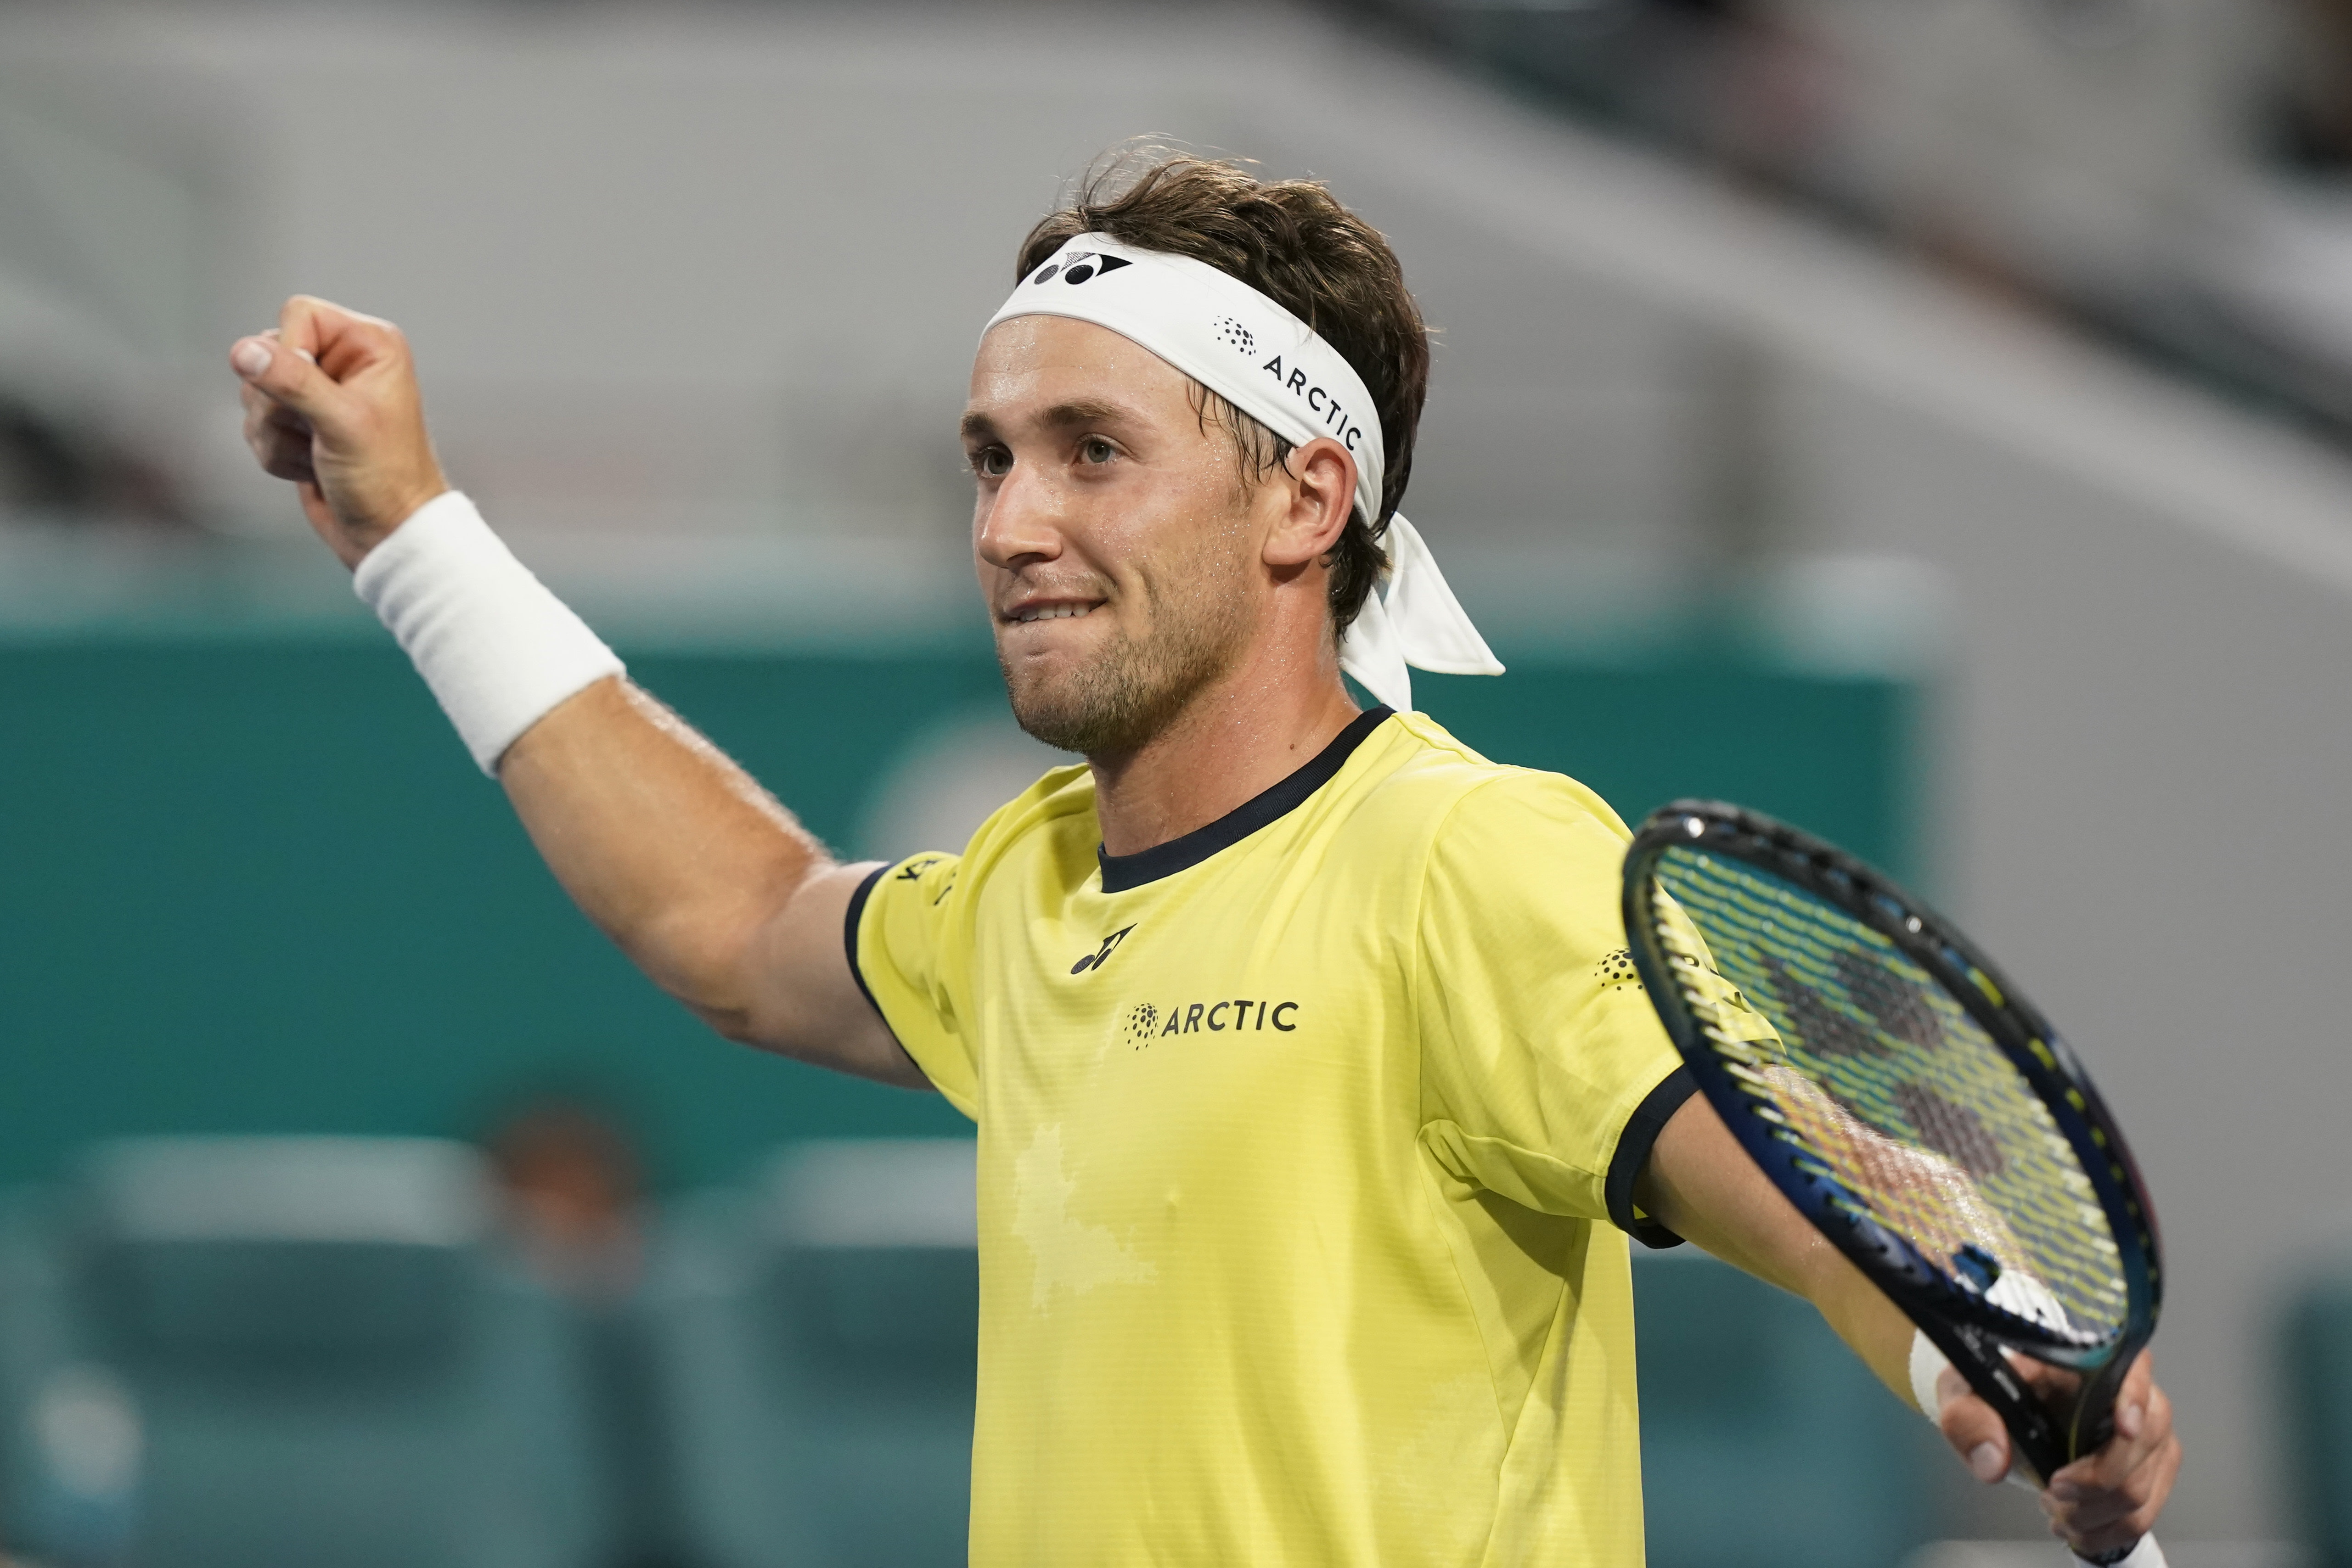 Casper Ruud scores first win over Alexander Zverev to equal best Masters 1000 showing